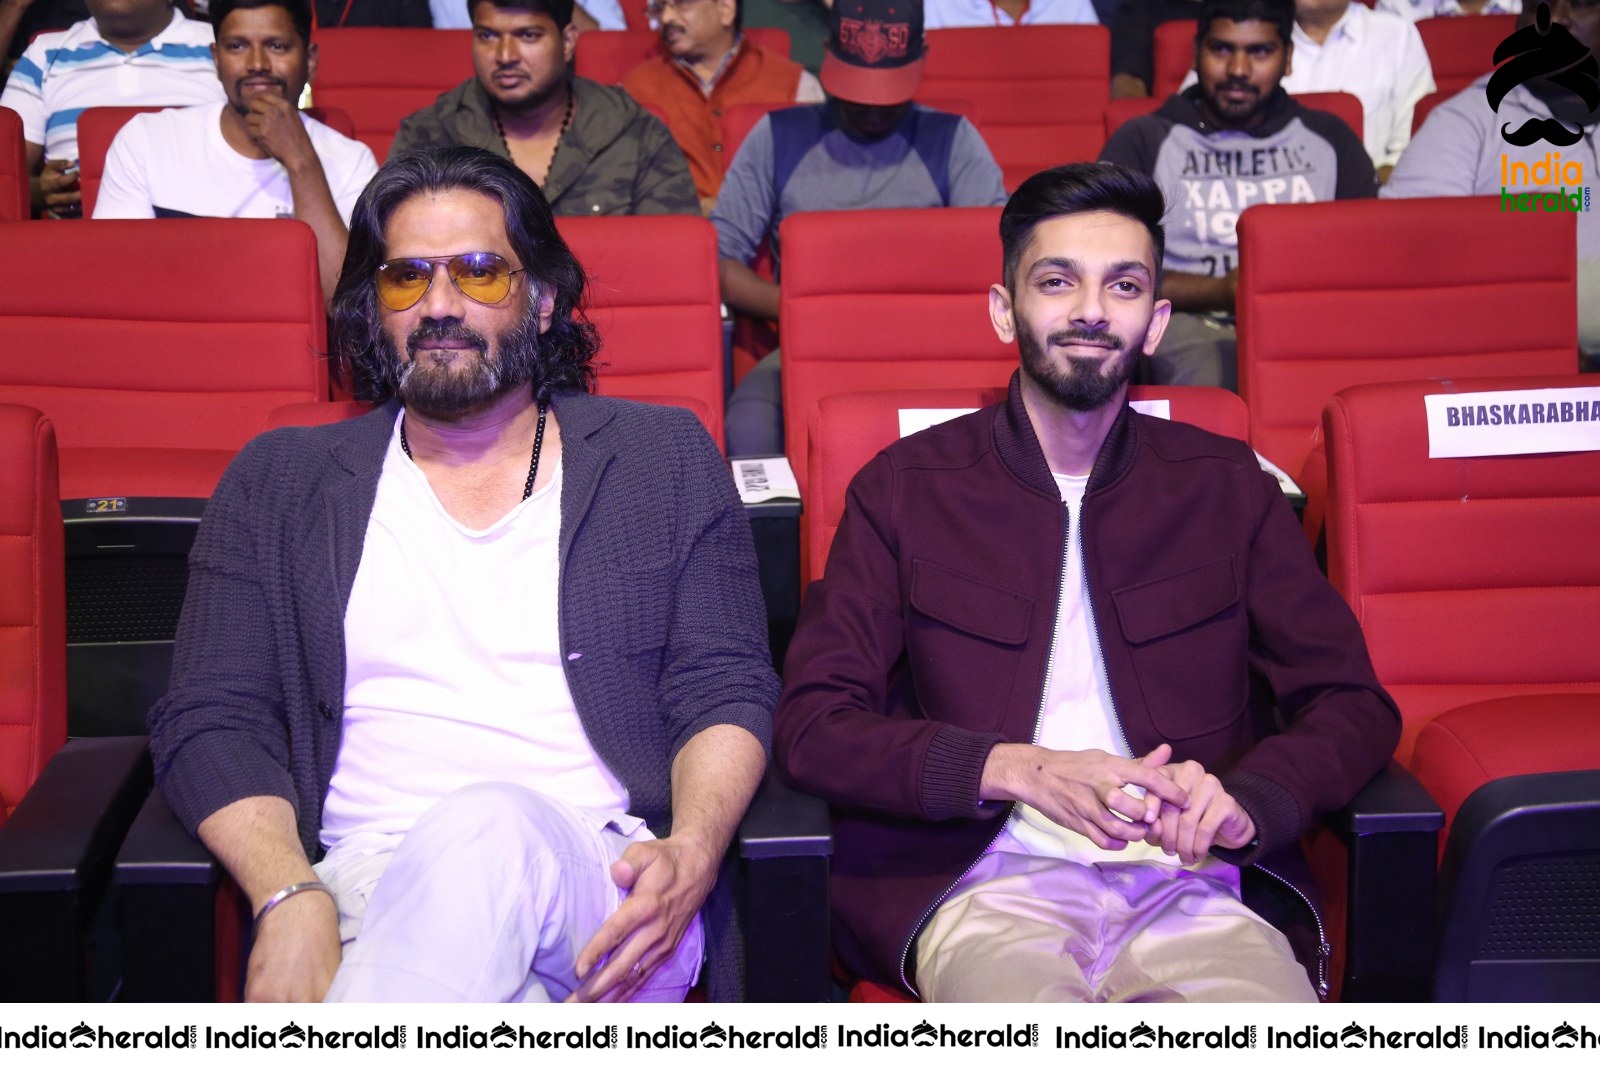 Actor Sunil Shetty Photos along with Music Composer Anirudh Set 2